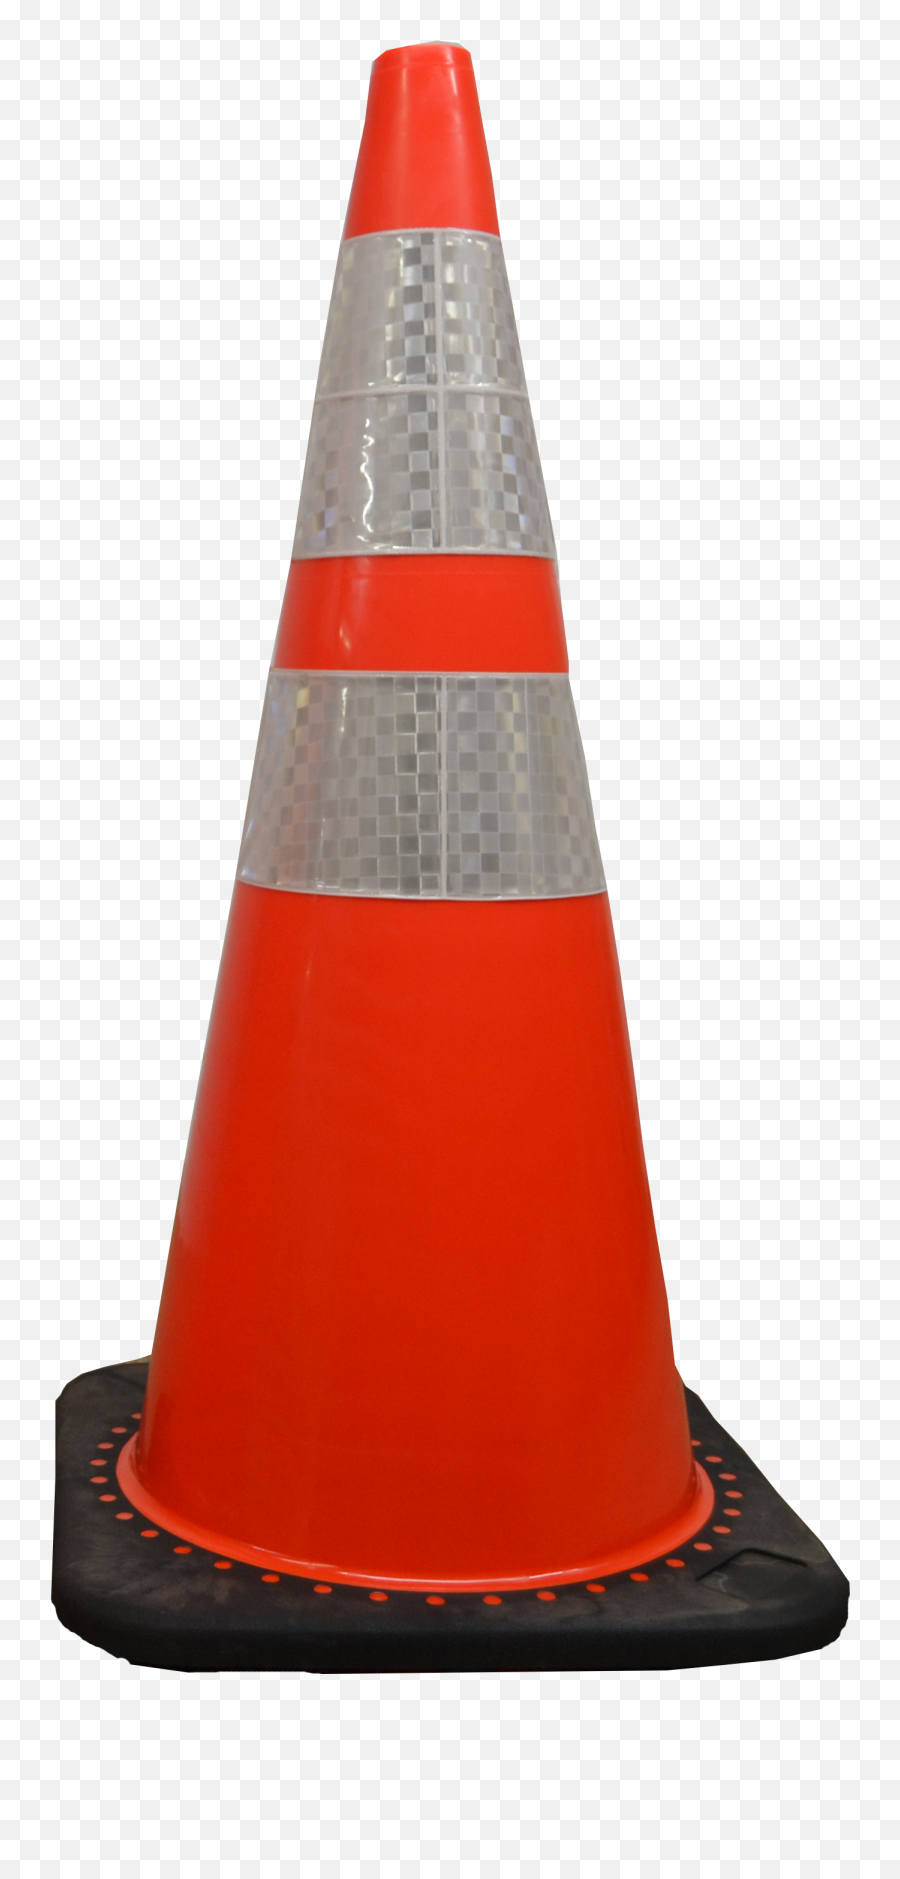 Download Traffic Cone Png - Ponce De Leon Inlet Lighthouse Museum,Traffic Cone Png